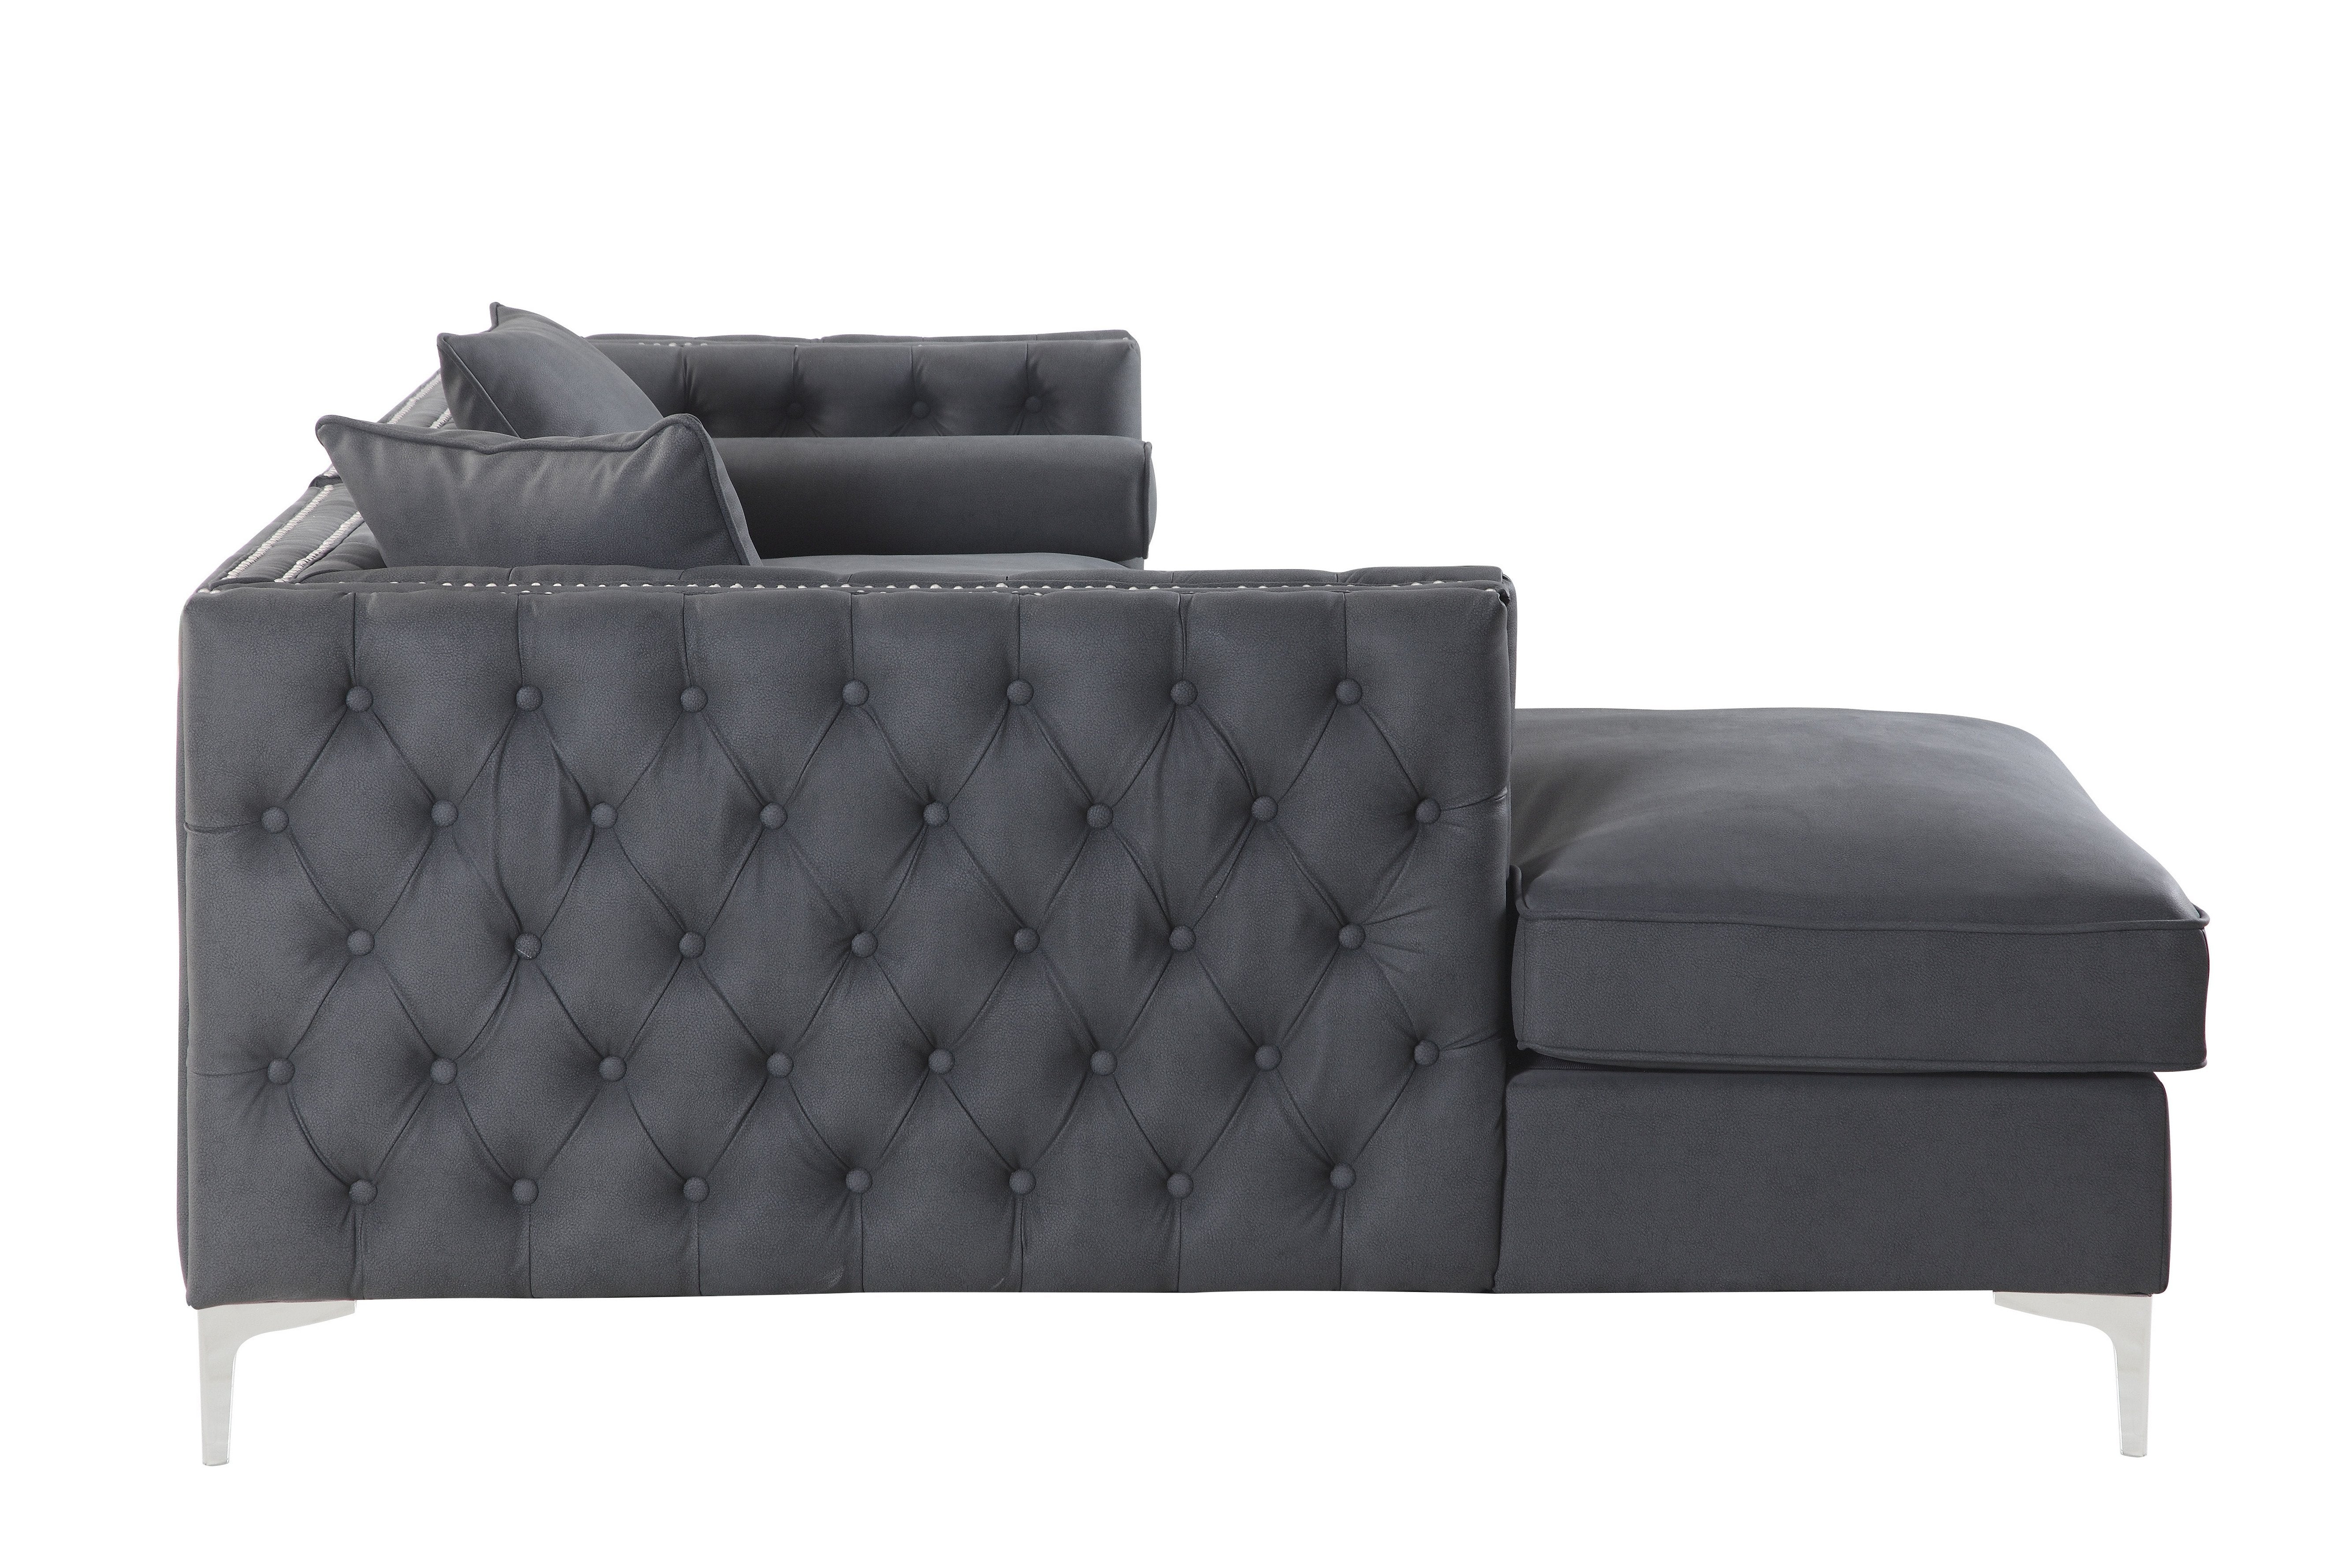 Monet Left Facing Tufted PU Leather Sectional Sofa